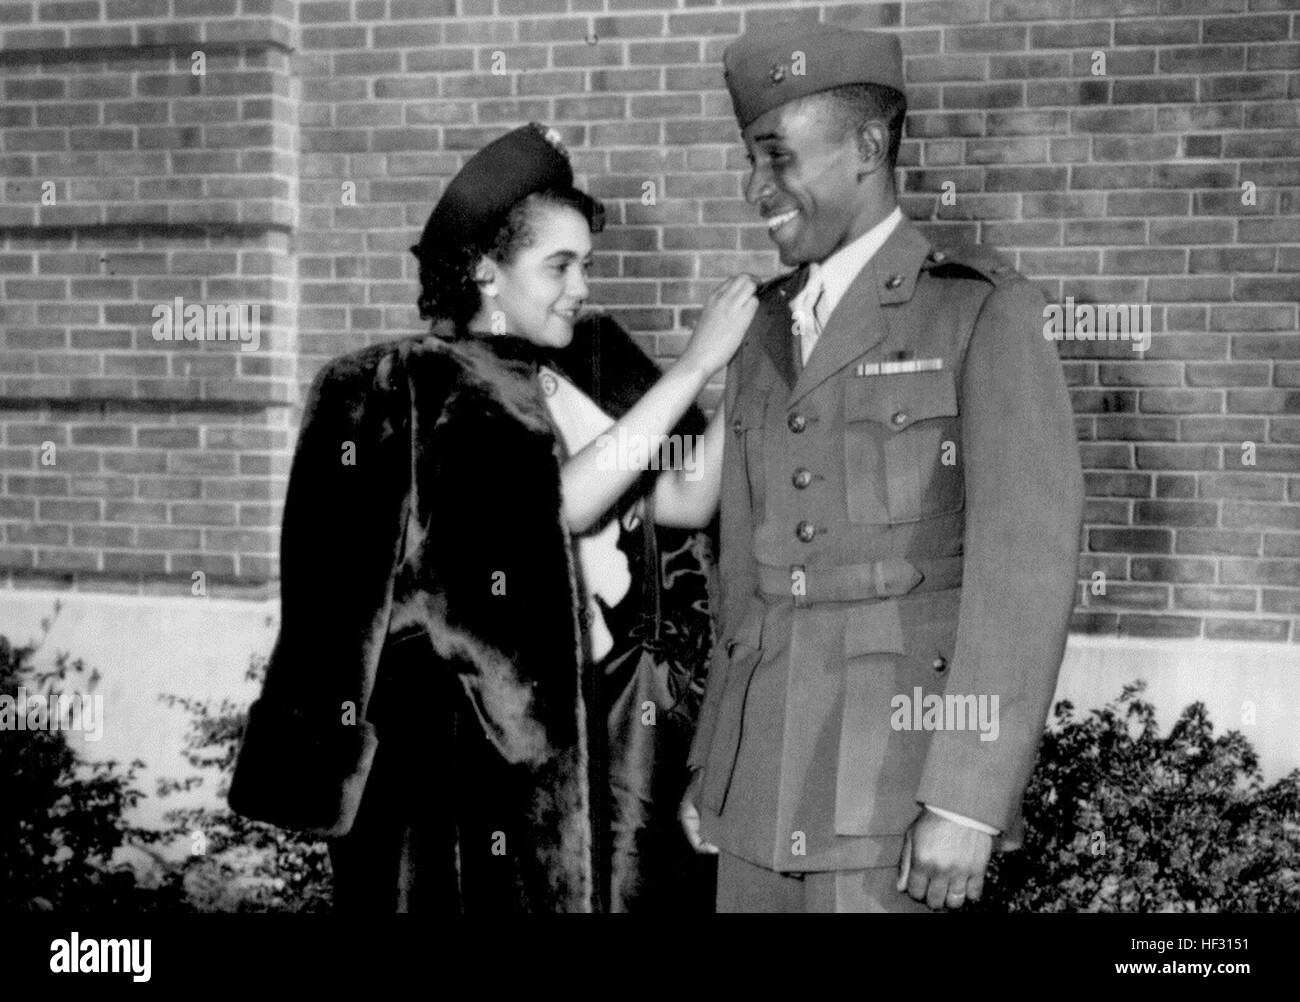 Frederick C. Branch became the first ever African-American Marine officer on Nov. 10, 1945. In honor of his success, the Frederick C. Branch Scholarship Program was created nearly 70 years later in 2006. Each year, 34 four-year Frederick C. Branch Scholarships are offered to students who plan to attend a Historically Black College or University (HBCU). Scholarship Shapes Marine Corps 140131-M-JI948-001 Stock Photo